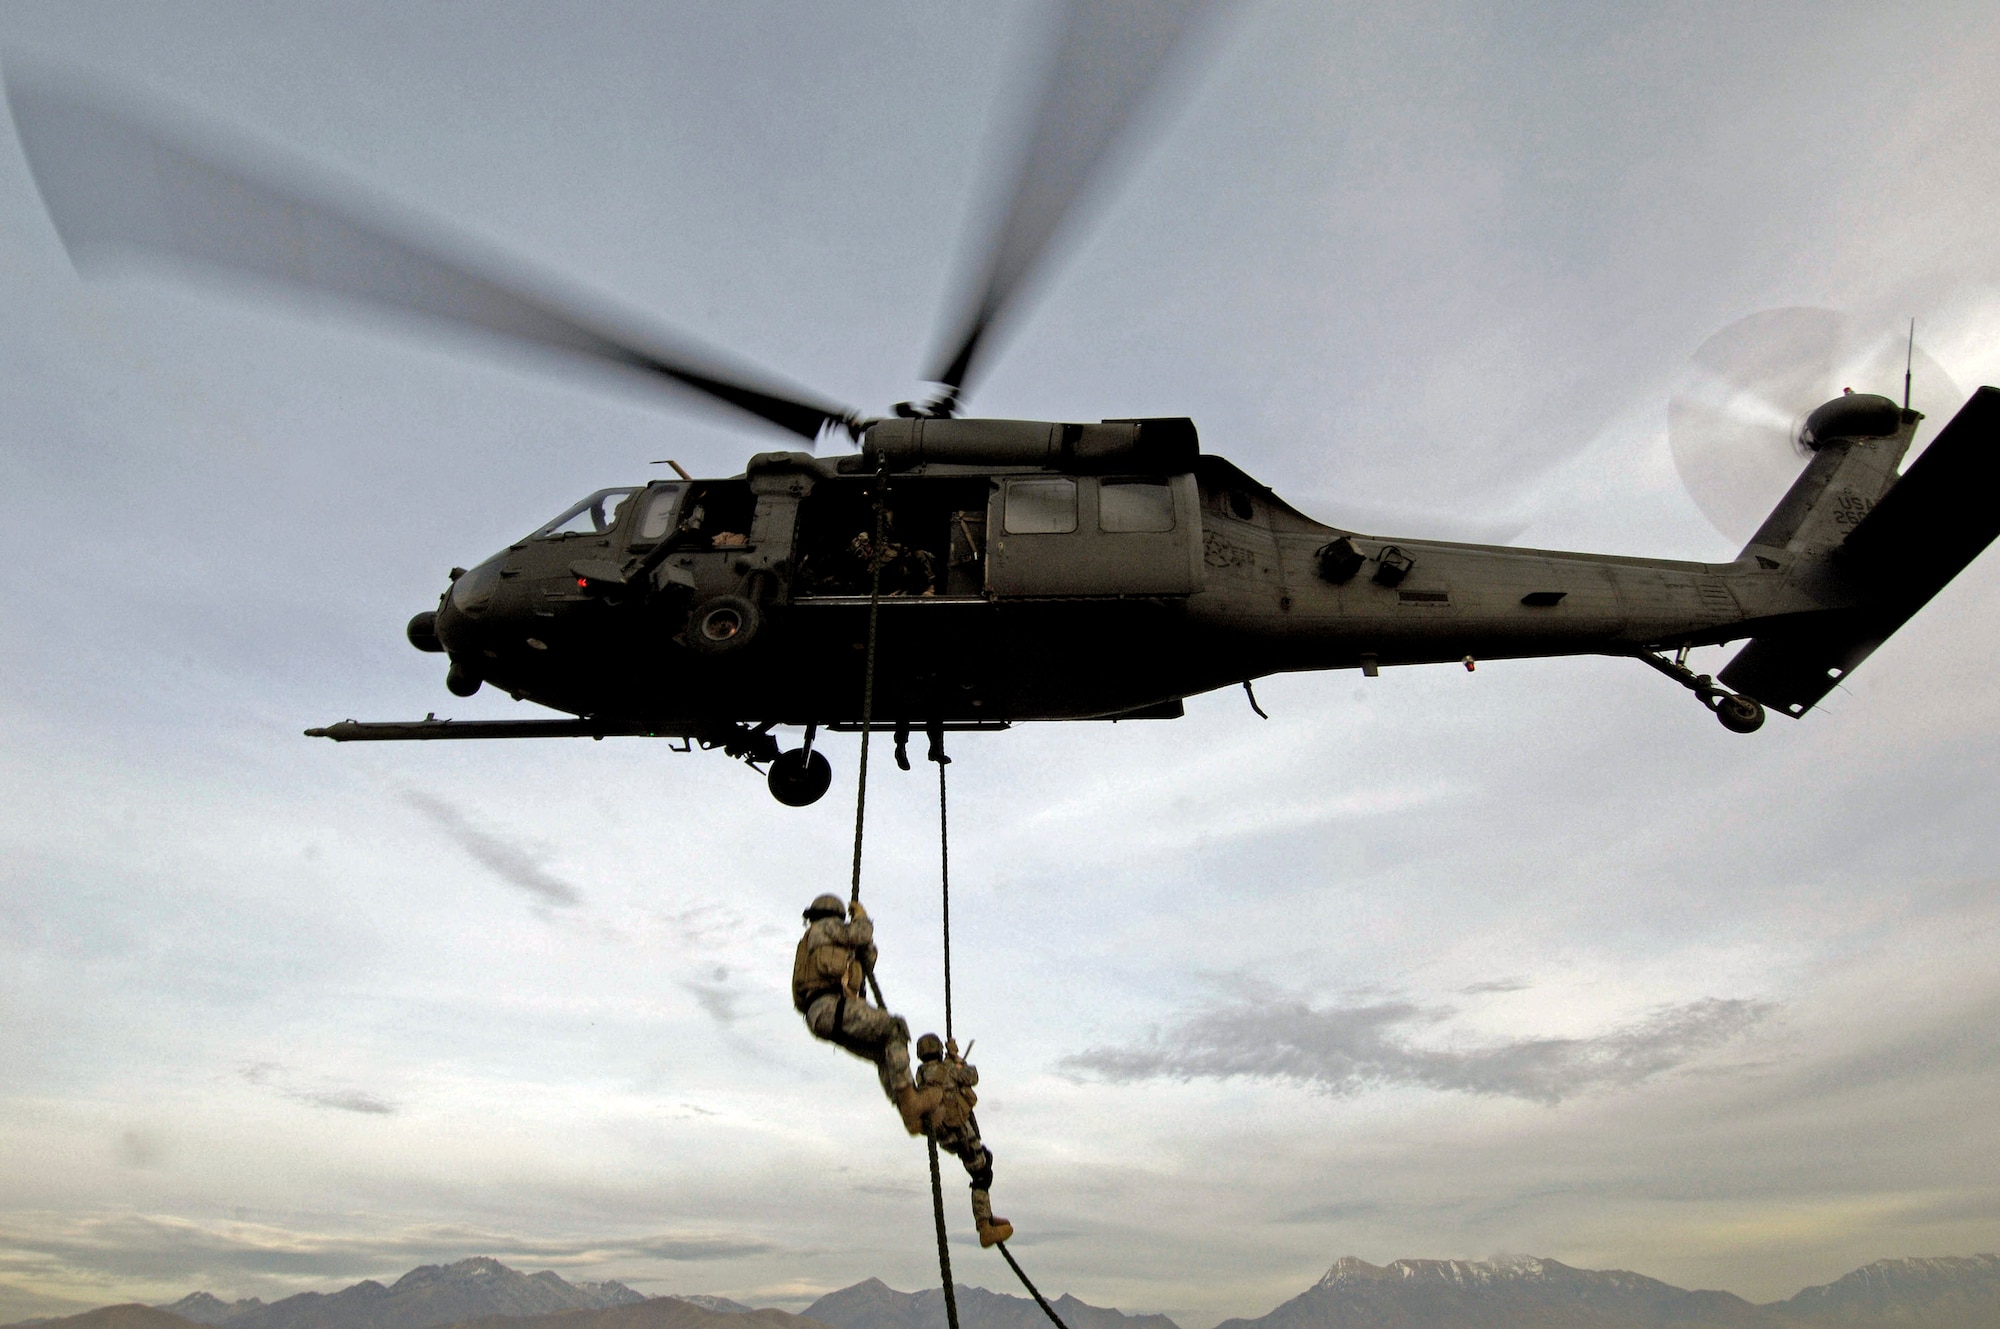 A Utah National Guard Soldier and 19th Special Forces member are lifted on board an HH-60 Pave Hawk over the Utah Test and Training Range during a combat search and rescue integration exercise Nov. 9. Members of the 34th Weapons Squadron from Nellis AFB led the search and recovery training. The exercise expanded the integration with Utah's 211th Aviation Group AH-64 Apache Joint Rotary Wing, 4th Fighter Squadron F-16 Fighting Falcon assets from Hill AFB, Utah, and special operations forces. Exercise participants also conducted extensive joint combat search and rescue operations against surface-to-air threats. The exercise is being run held Nov. 6 through 15. (U.S. Air Force photo/Master Sgt. Kevin J. Gruenwald) 
